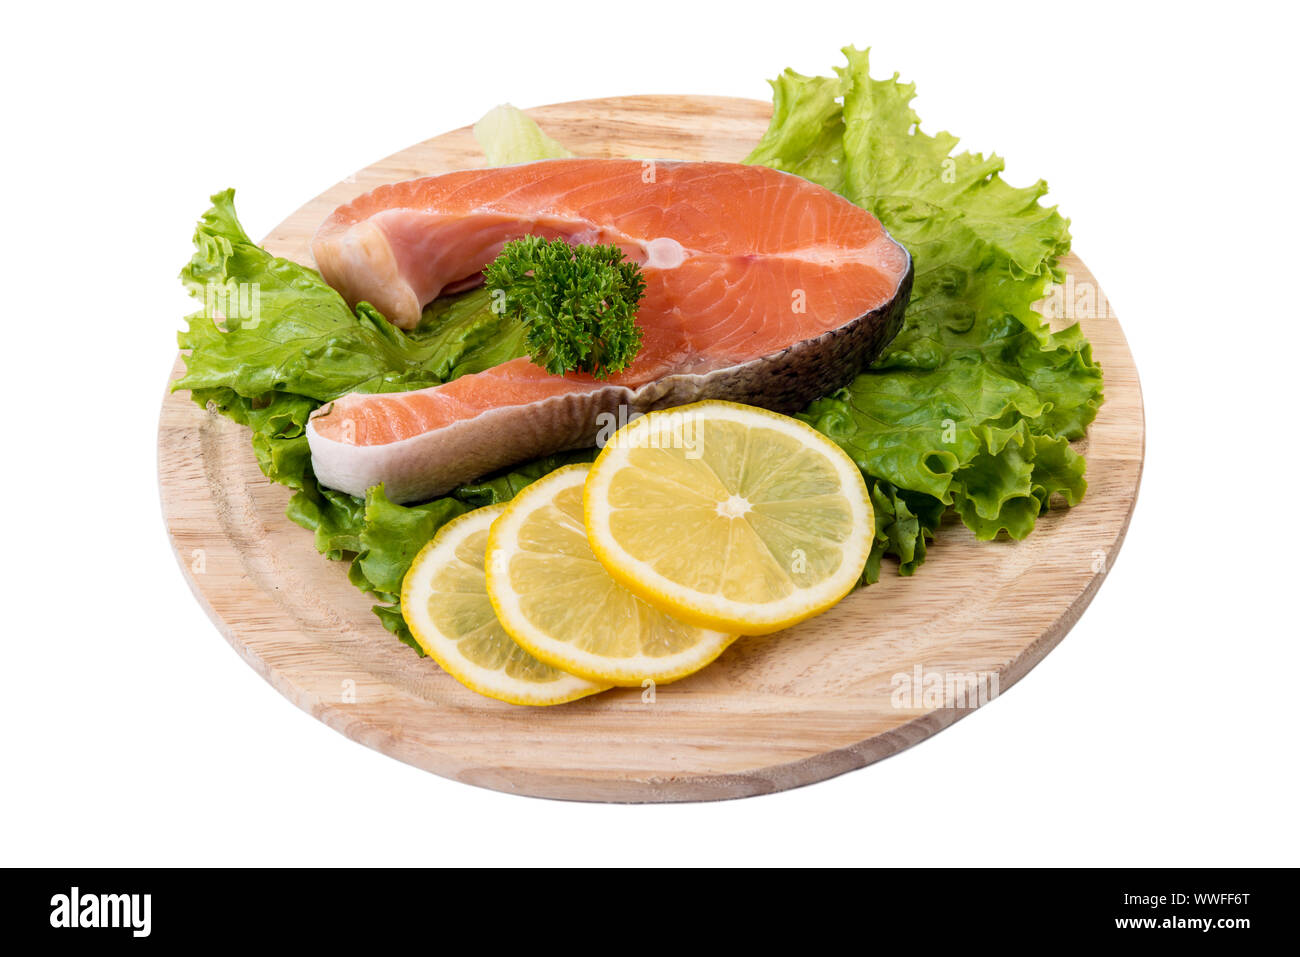 https://c8.alamy.com/comp/WWFF6T/raw-salmon-steak-on-the-wooden-board-isolated-on-white-with-clipping-path-WWFF6T.jpg